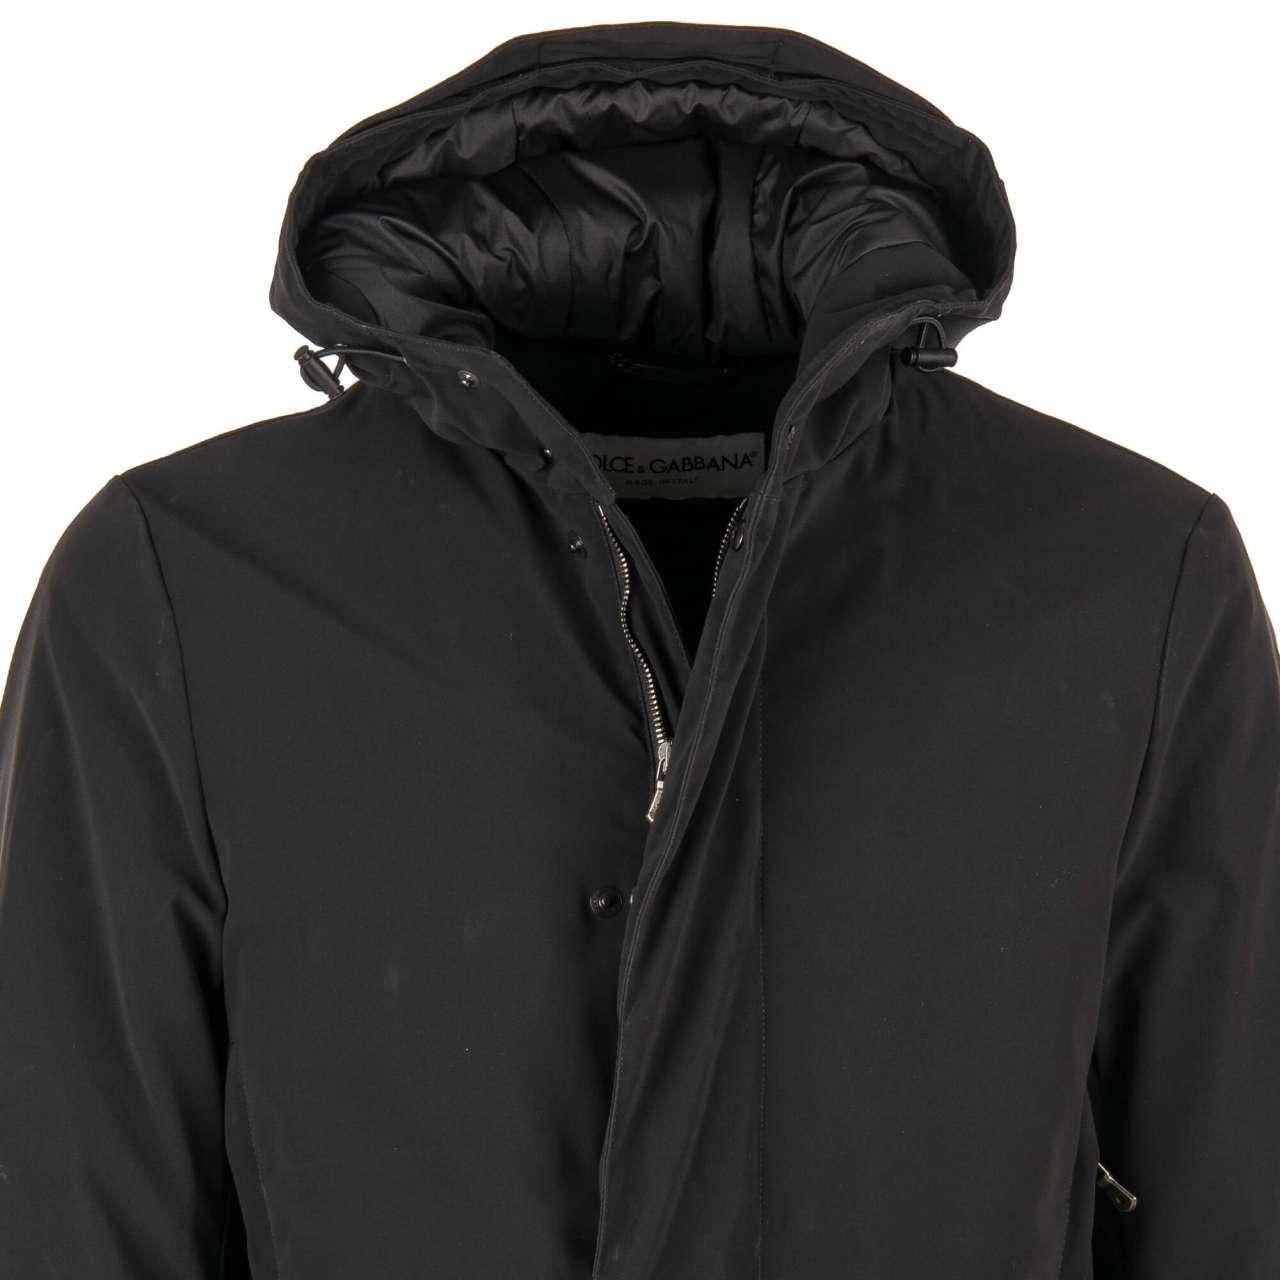 Dolce & Gabbana Classic Hooded Parka Jacket with Pockets and Logo Black 46 S For Sale 1